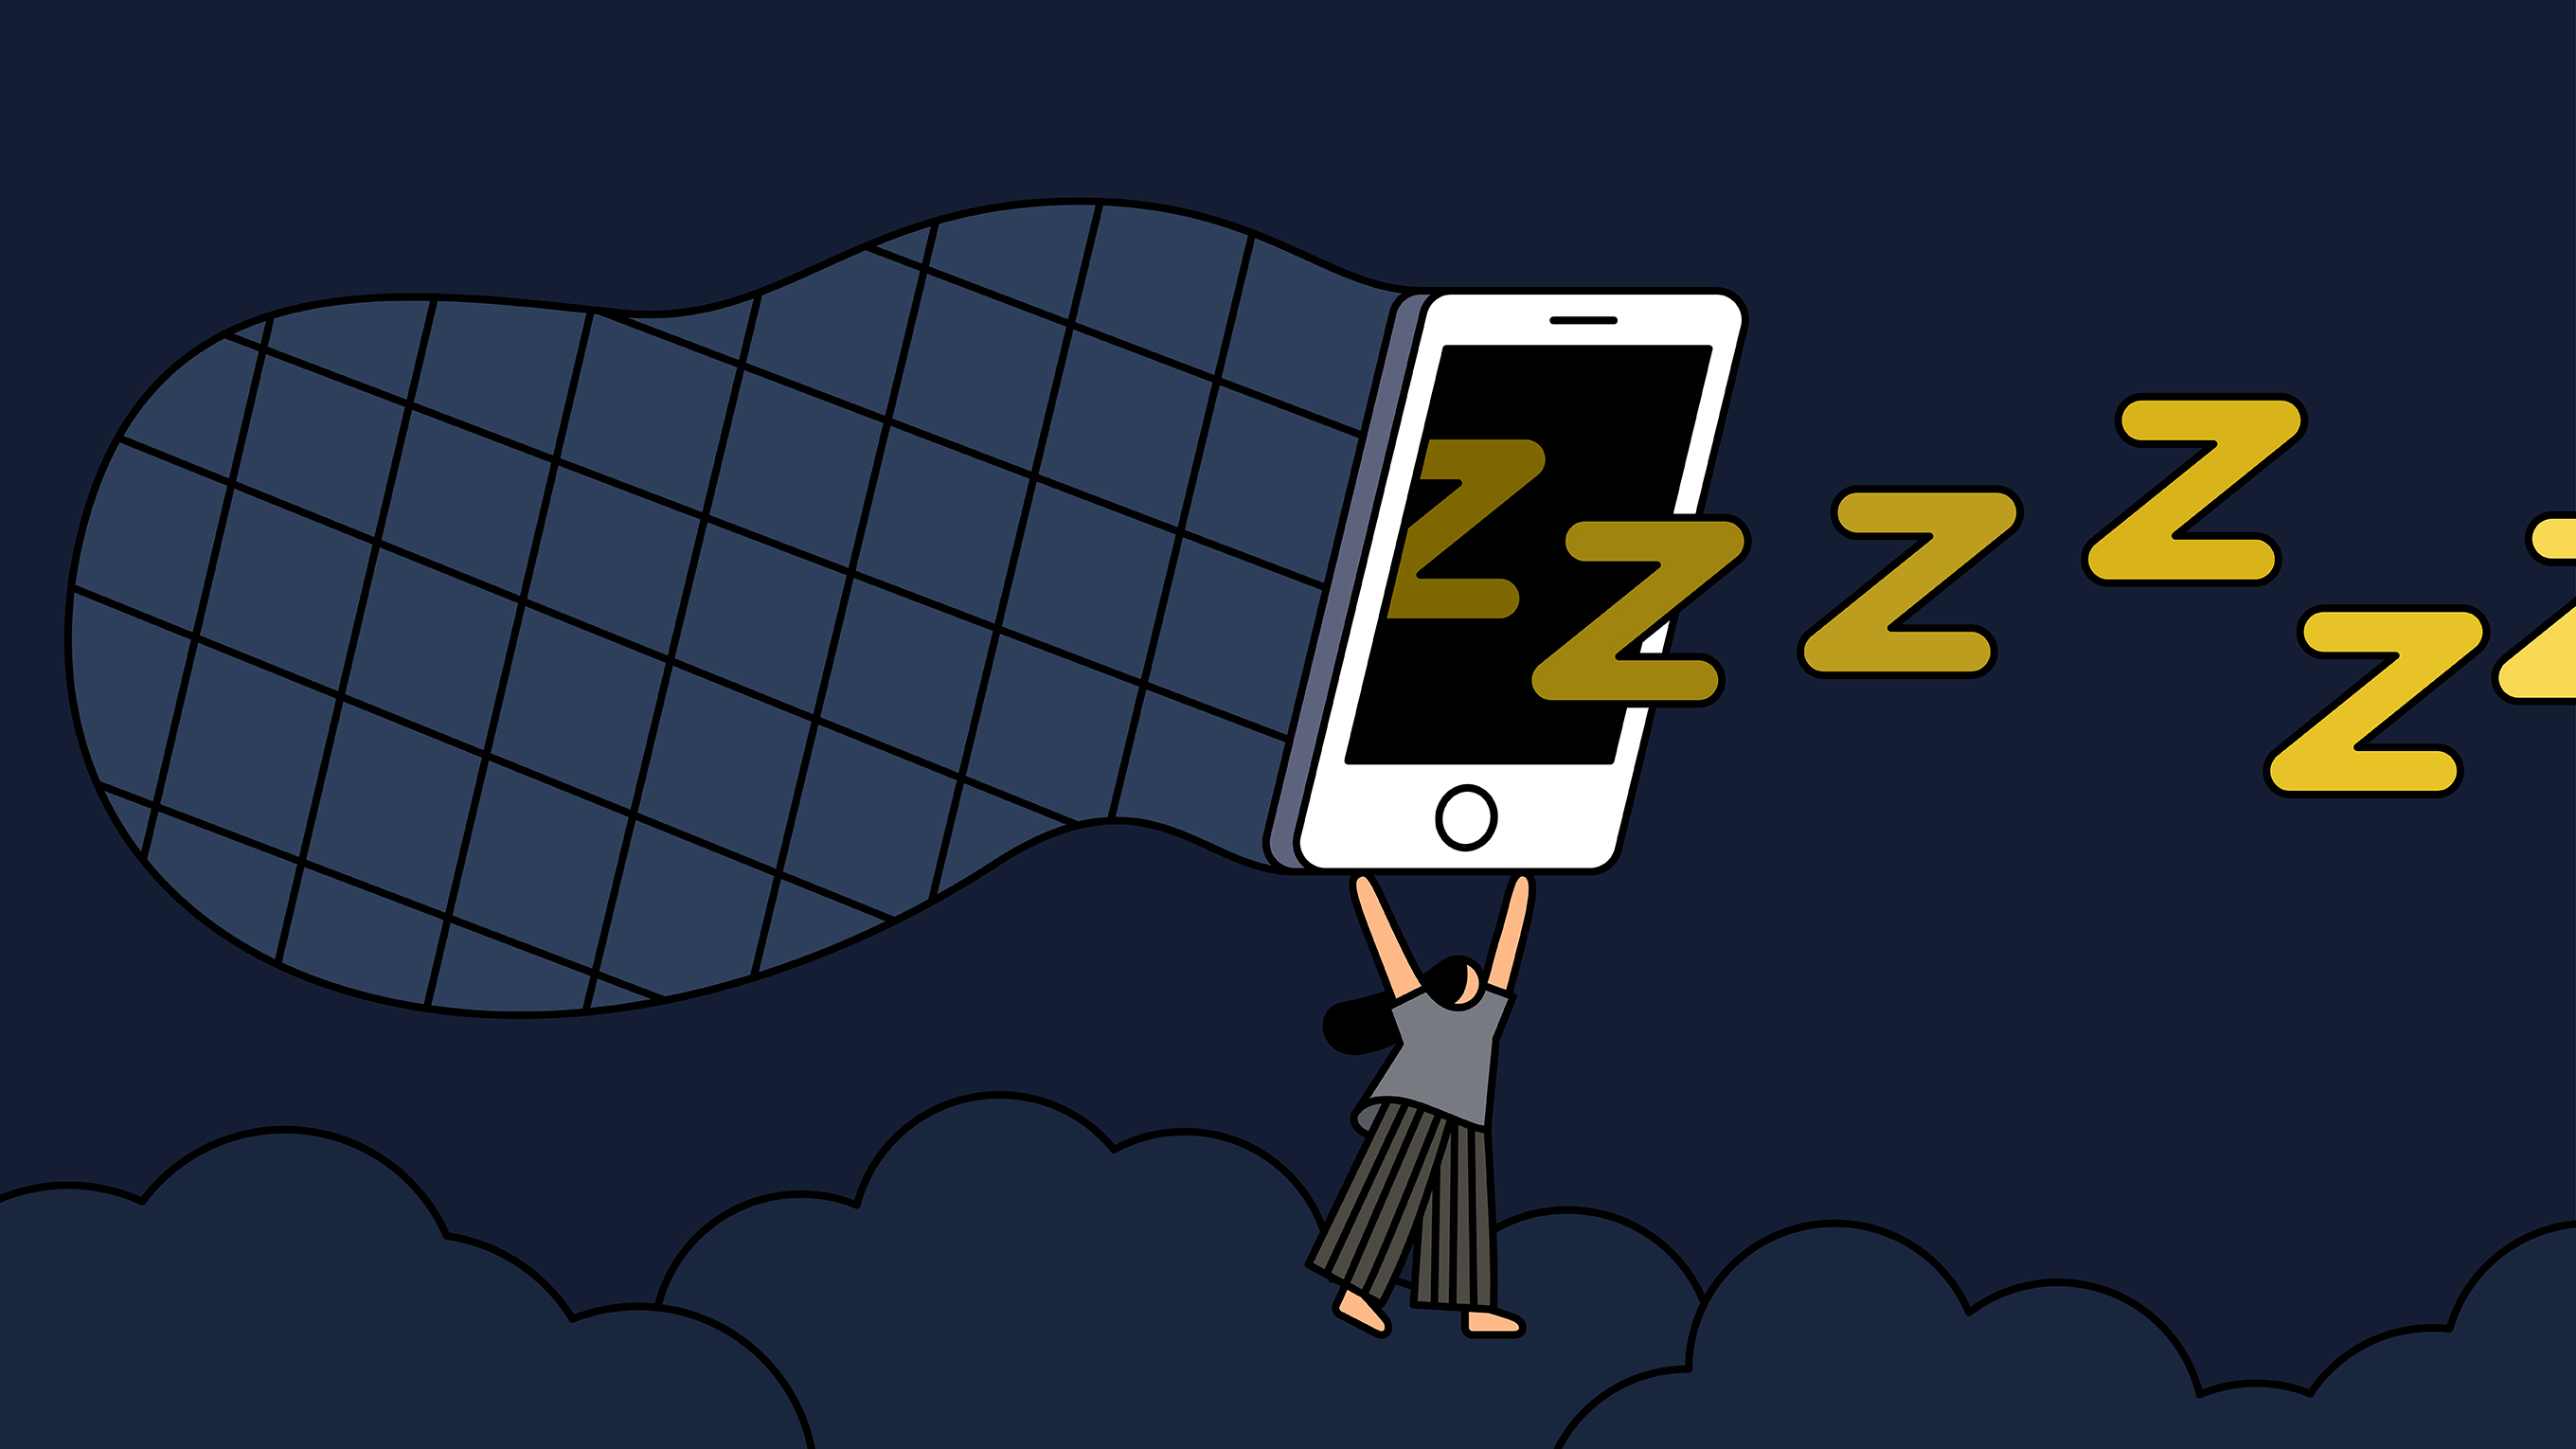 Conceptual illustration of a woman catching z&#039;s in a net that looks like a smartphone.